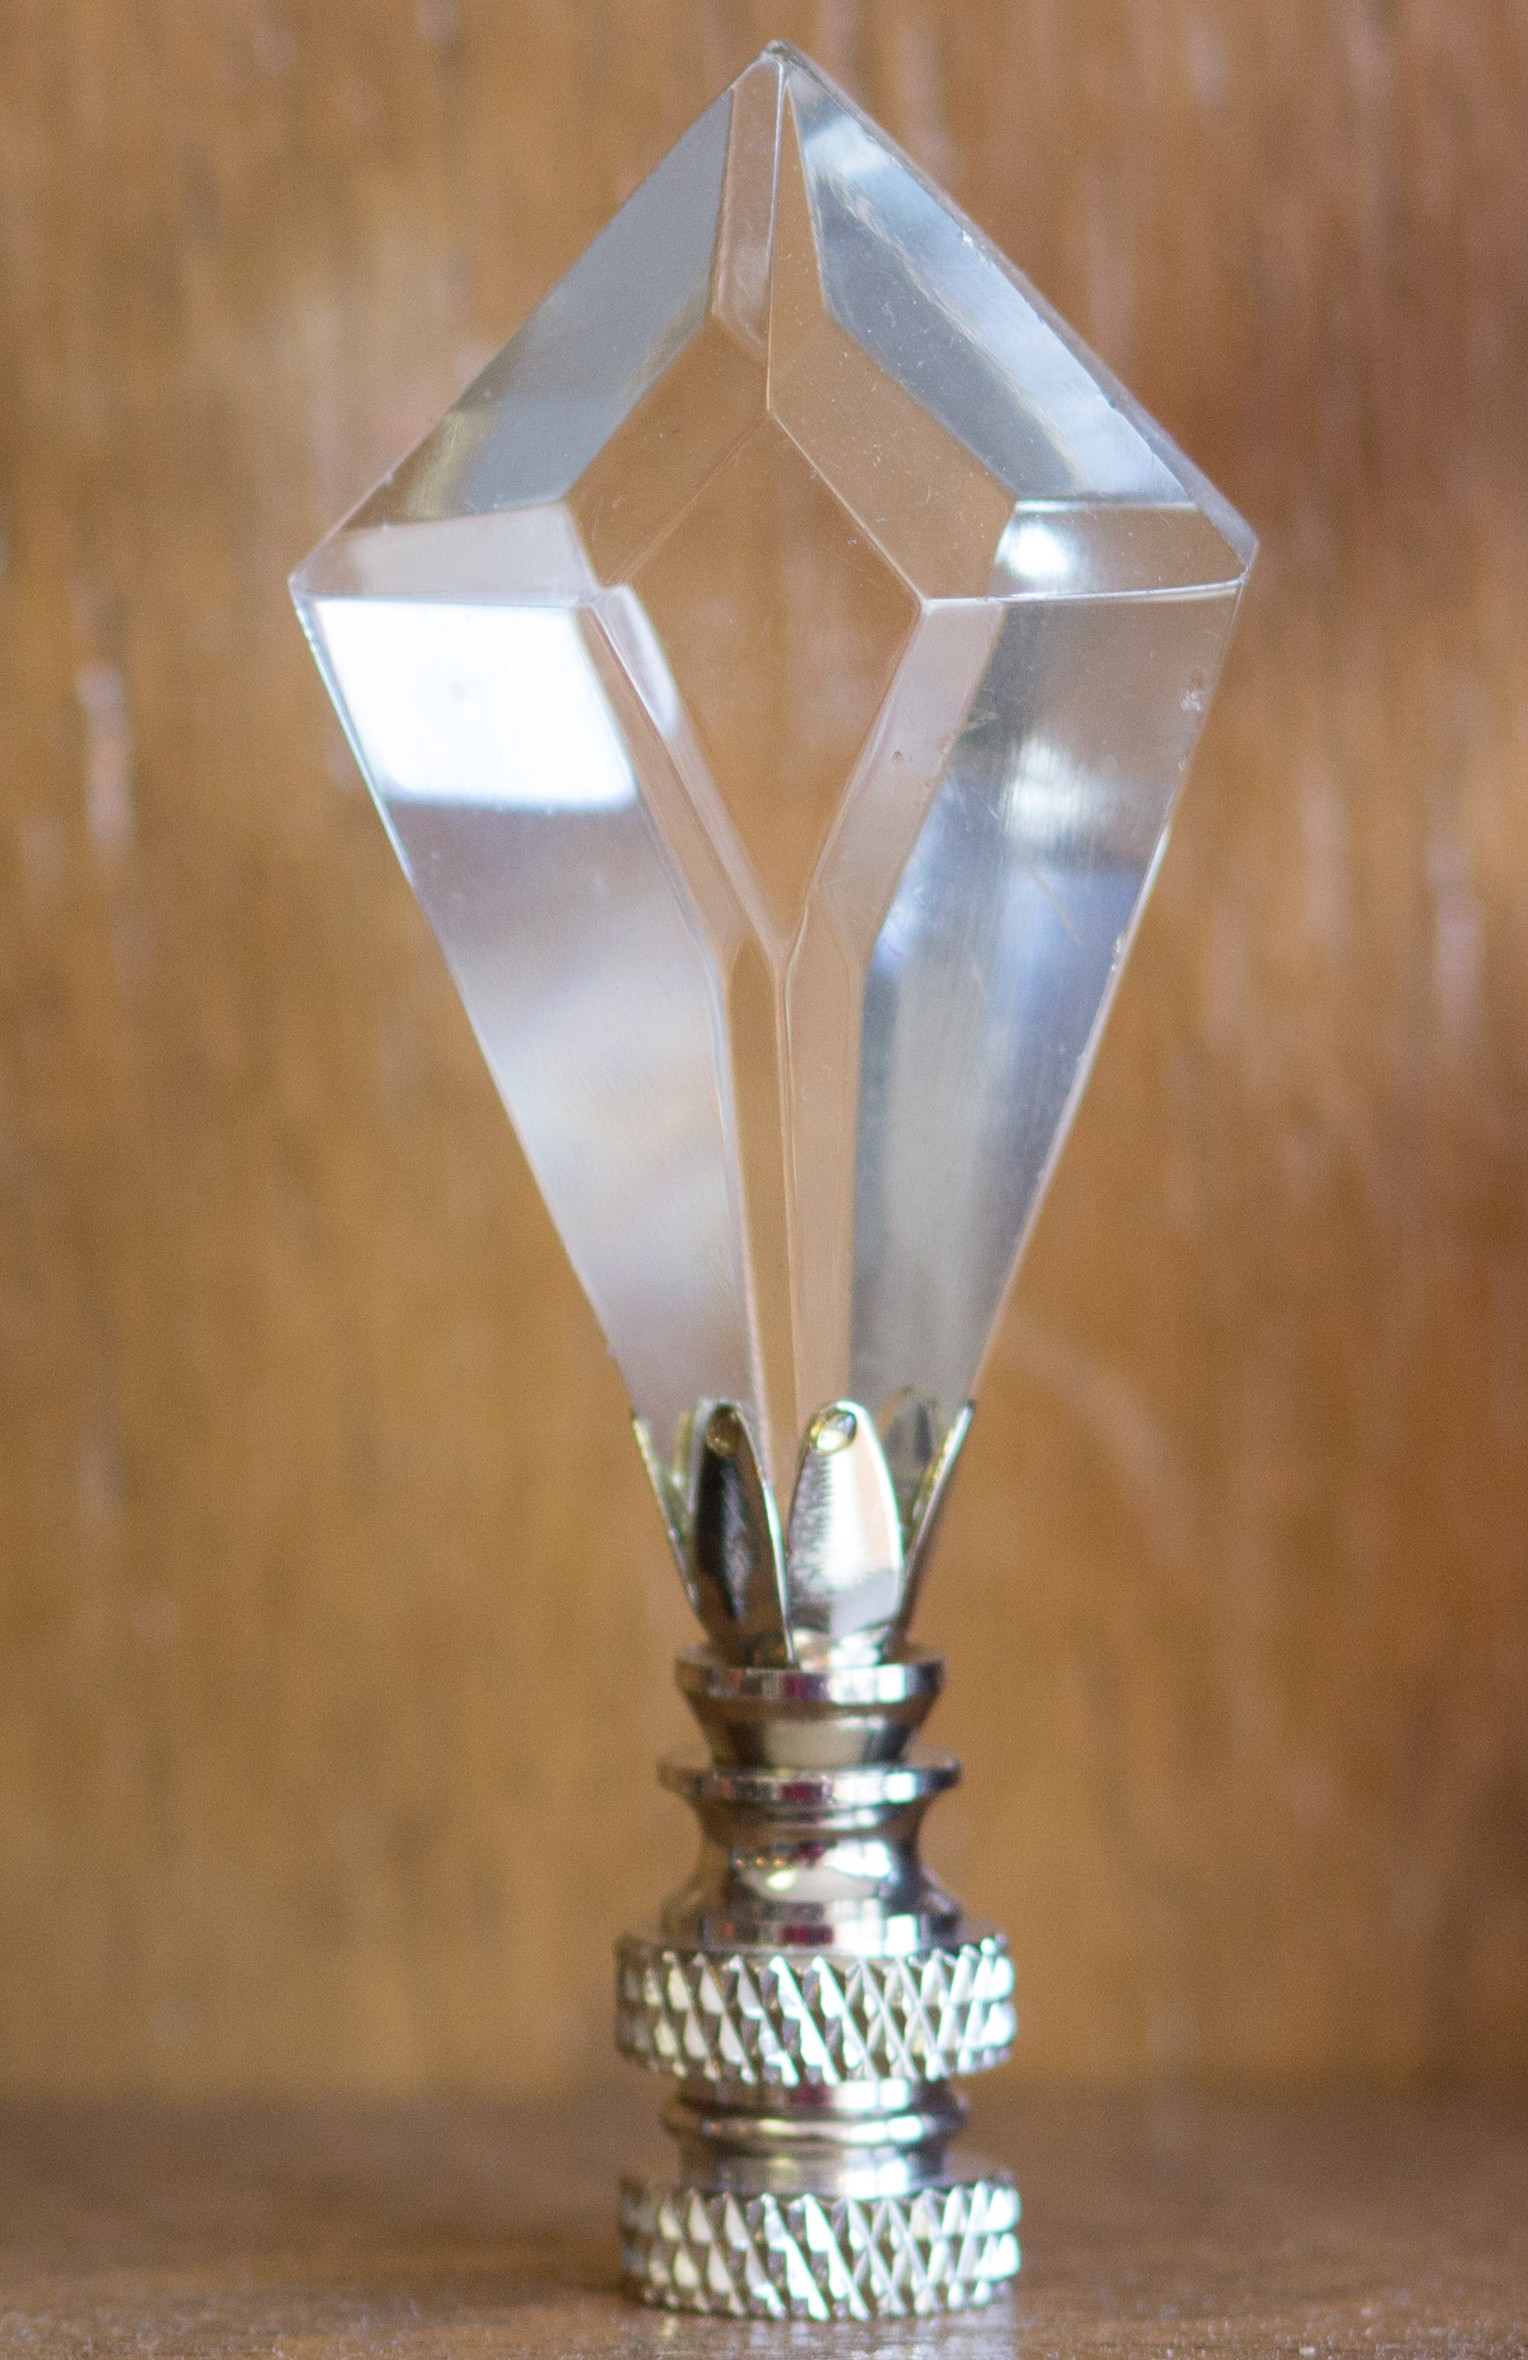 Crystal lamp finials for your home decoration warisan 9